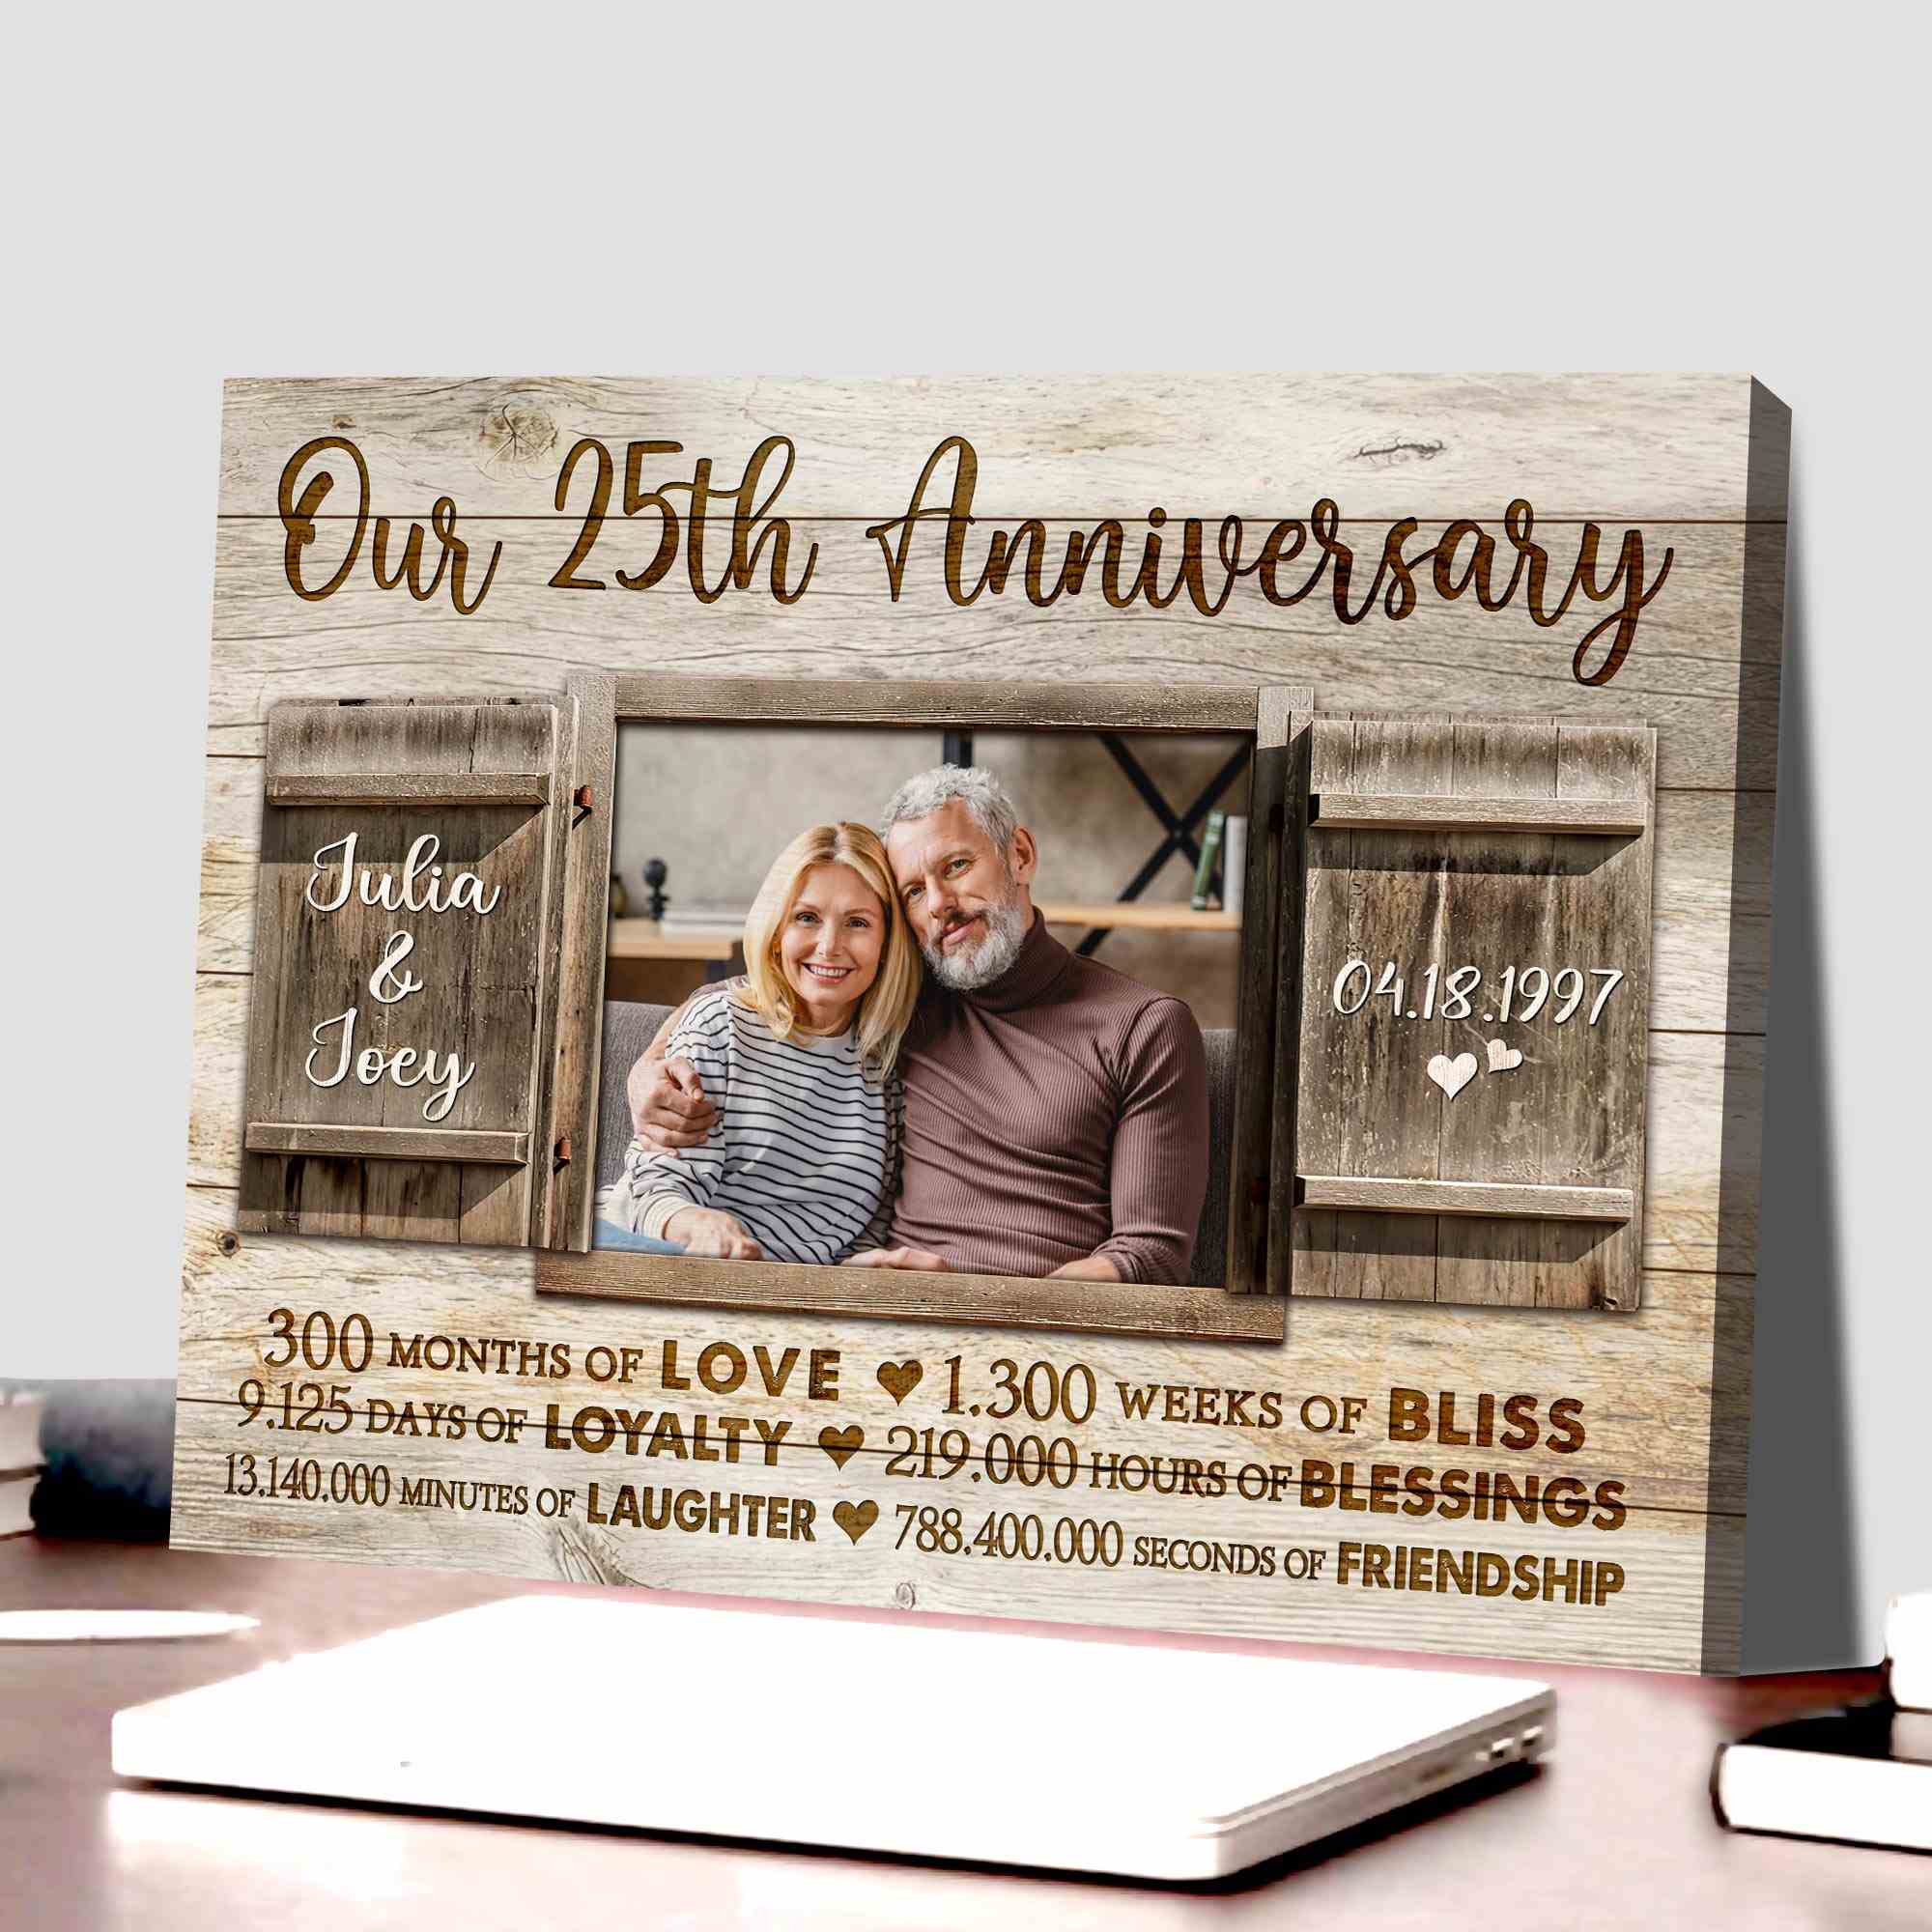 25th Anniversary (Silver Jubilee) Gifts For Parents & Couples - Zwende